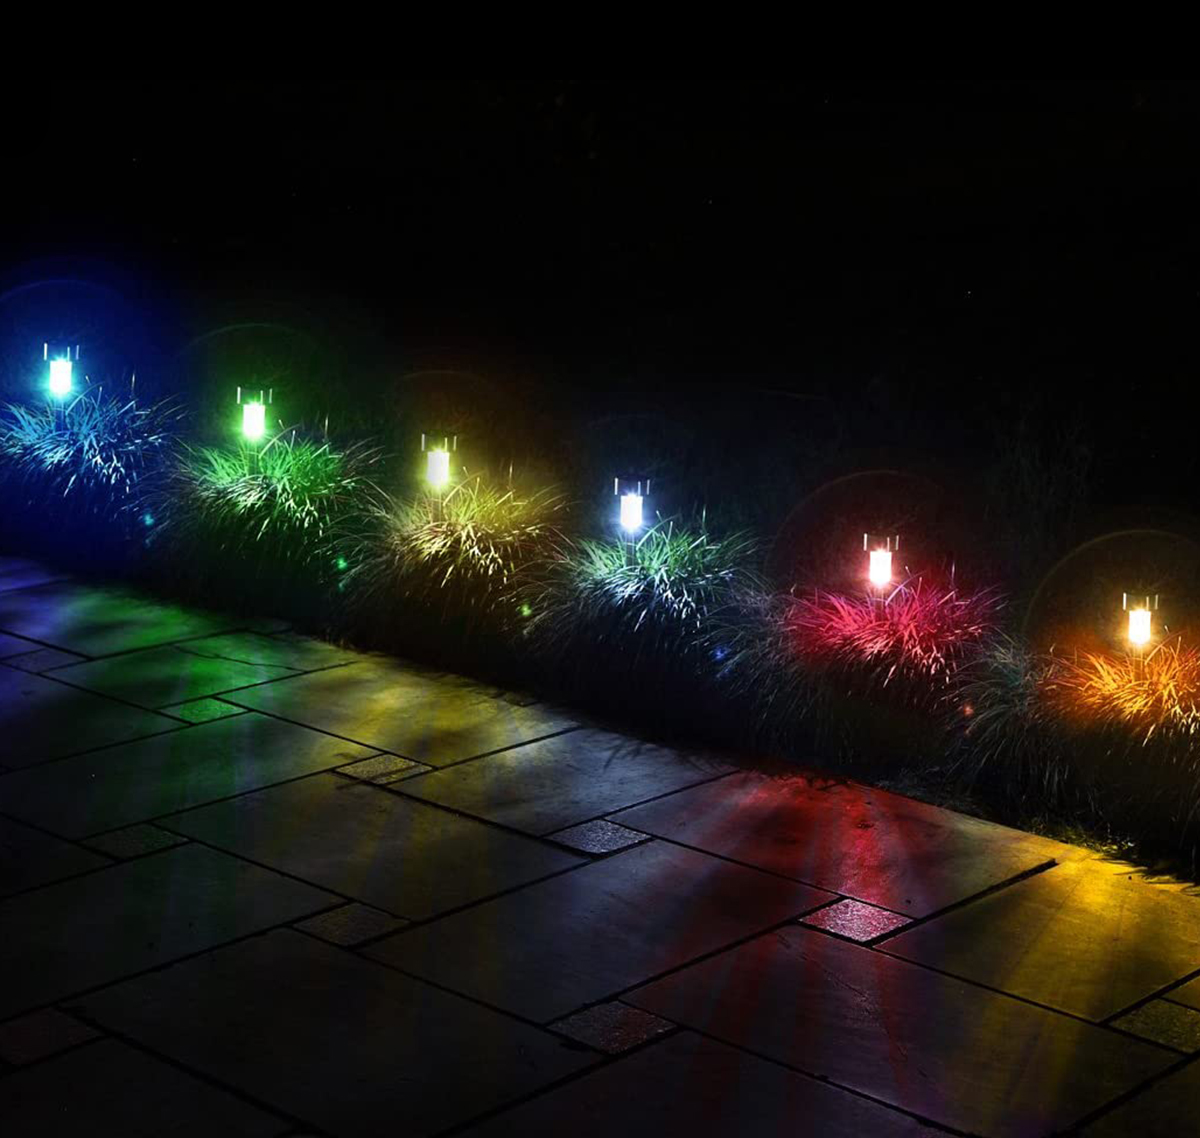 GIGALUMI Solar Lights, Outdoor LED Path Light Stainless Steel-12 Pack (Multi-Color) - image 2 of 6